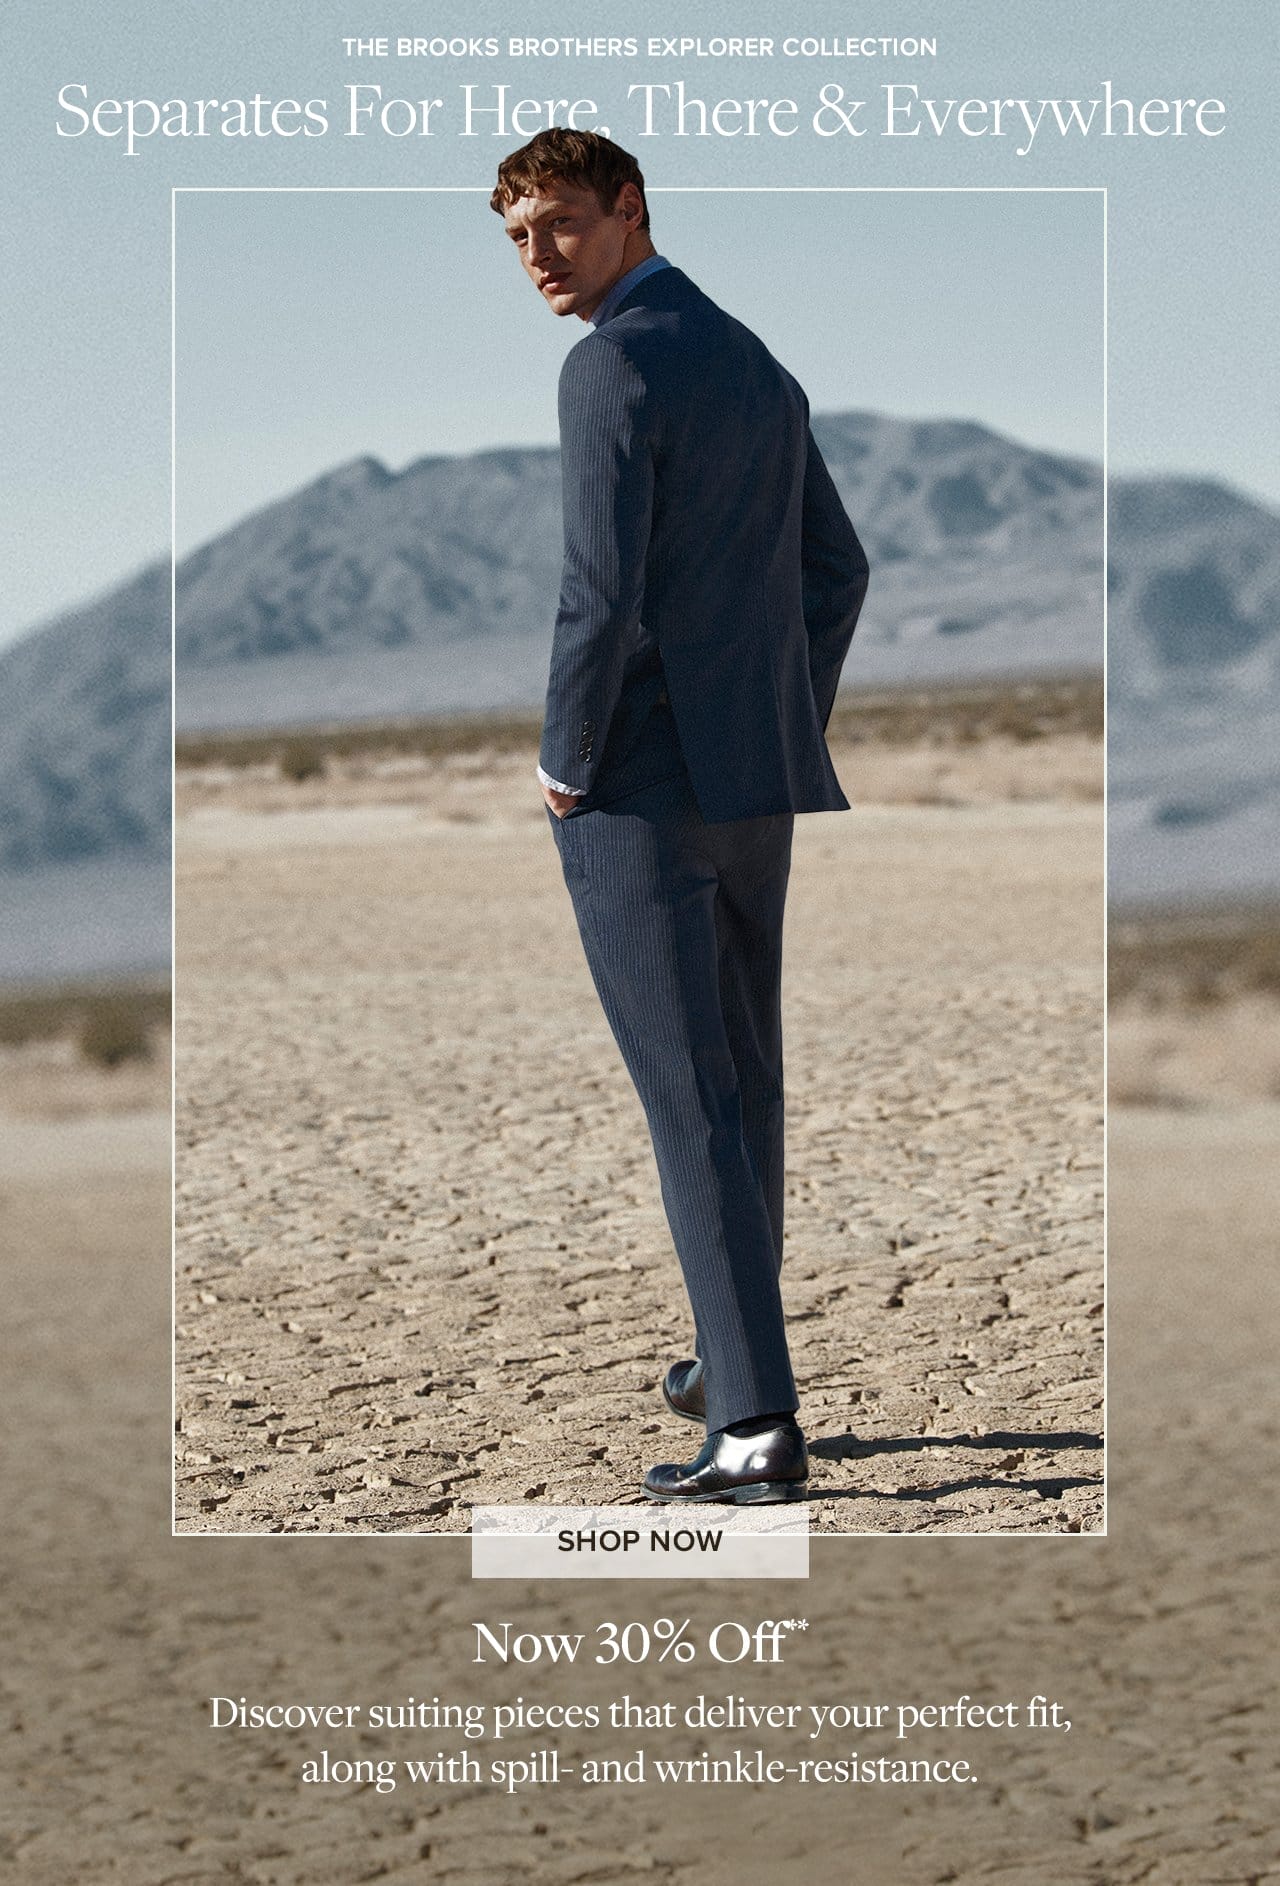 The Brooks Brothers Explorer Collection Separates For Here, There and Everywhere. Shop Now Now 30% Off Discover suiting pieces that deliver your perfect fit, along with spill-and wrinkle-resistance.